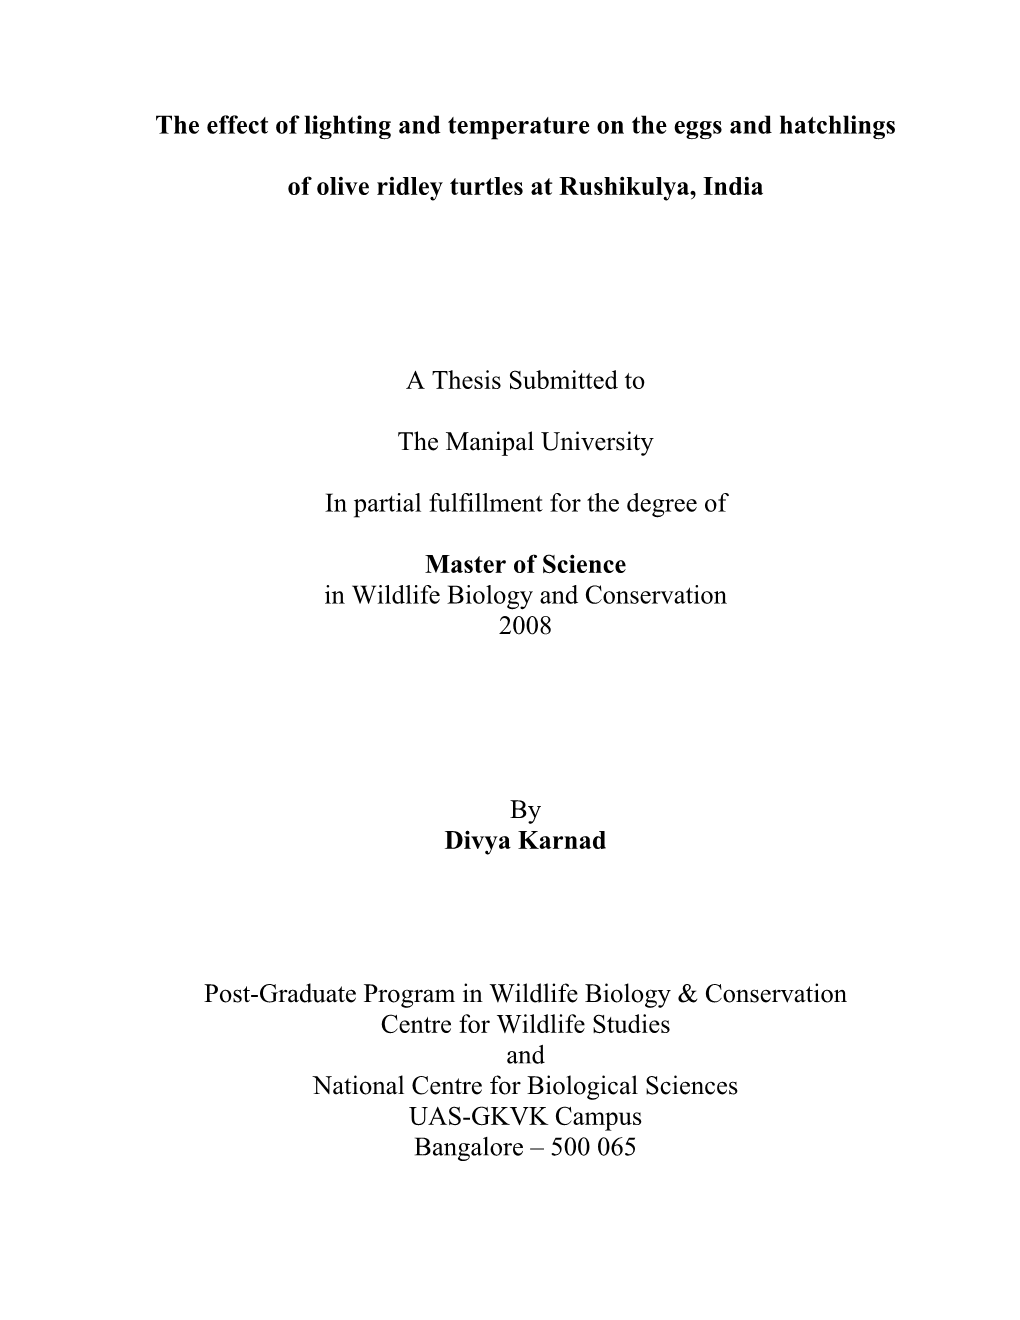 The Effect of Lighting and Temperature on the Eggs and Hatchlings of Olive Ridley Turtles at Rushikulya, India a Thesis Submitte